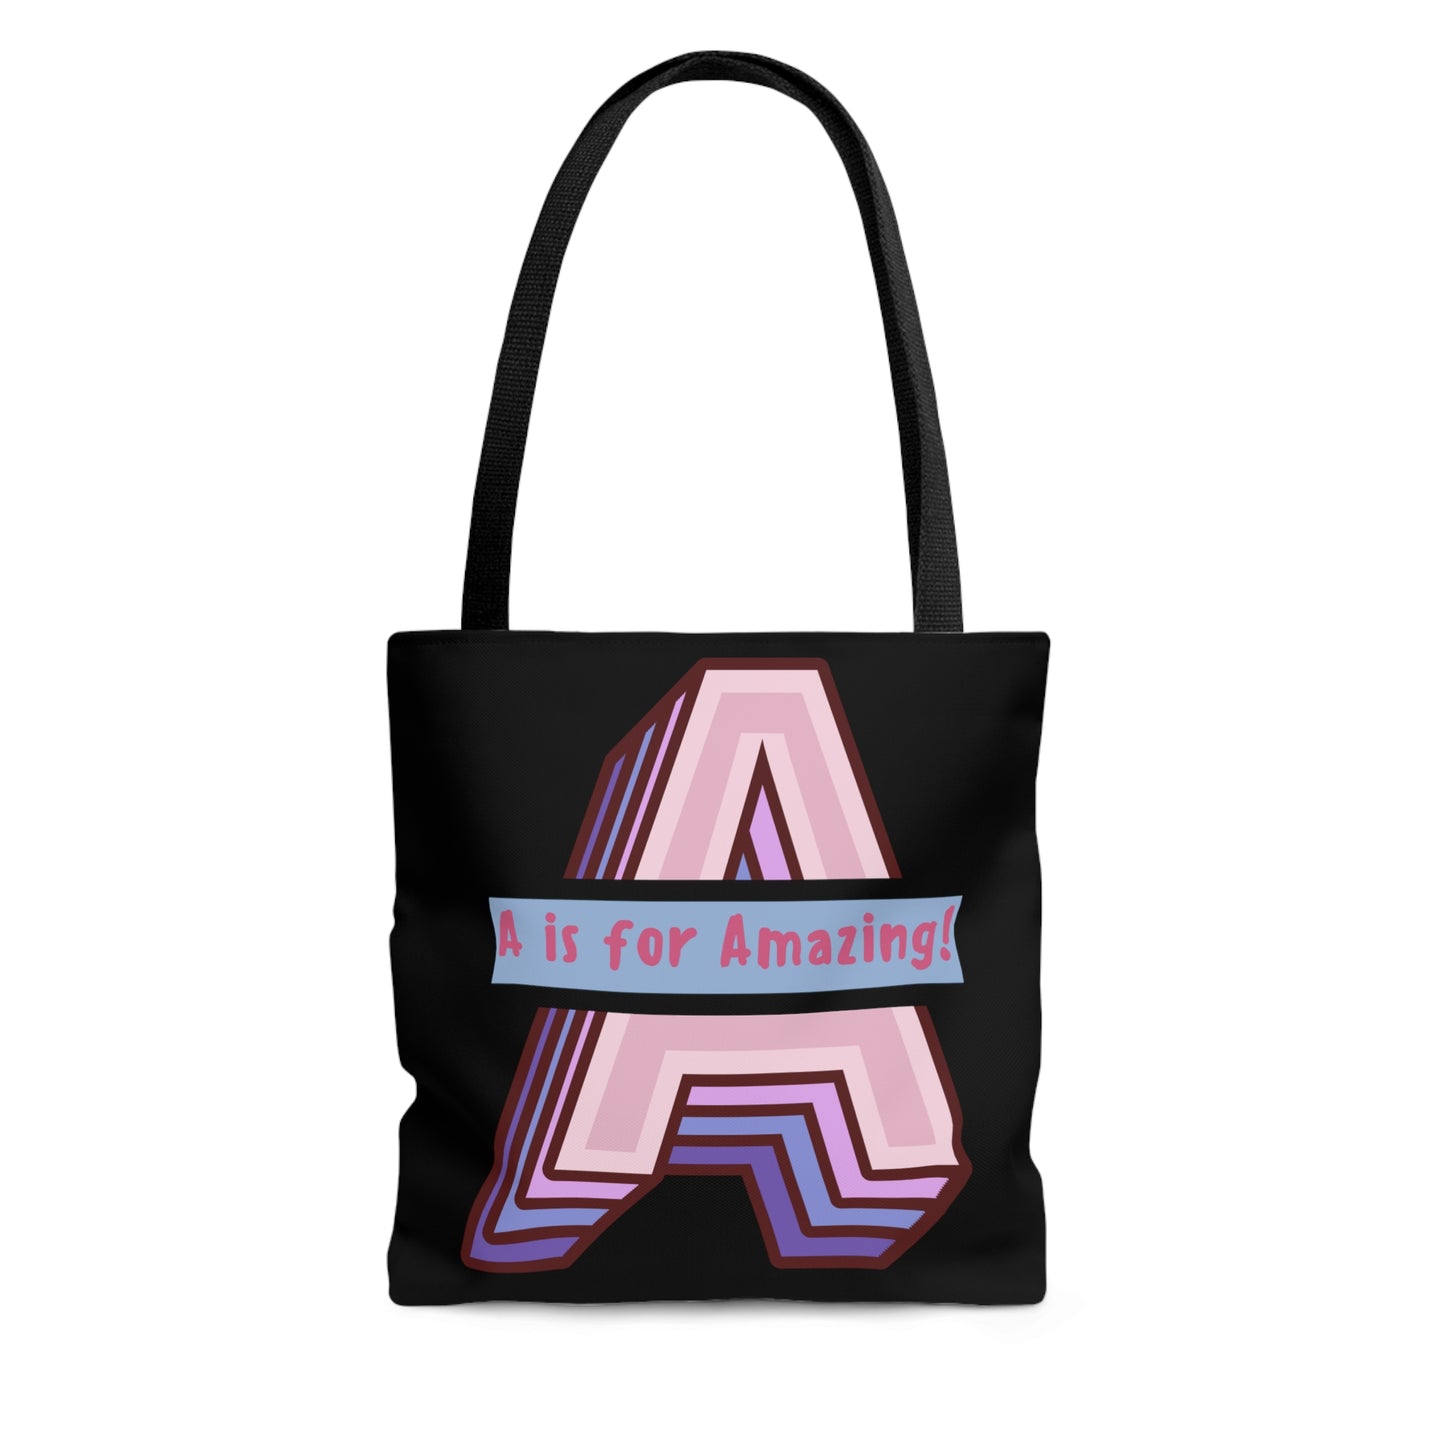 A is For Amazing Tote Bag